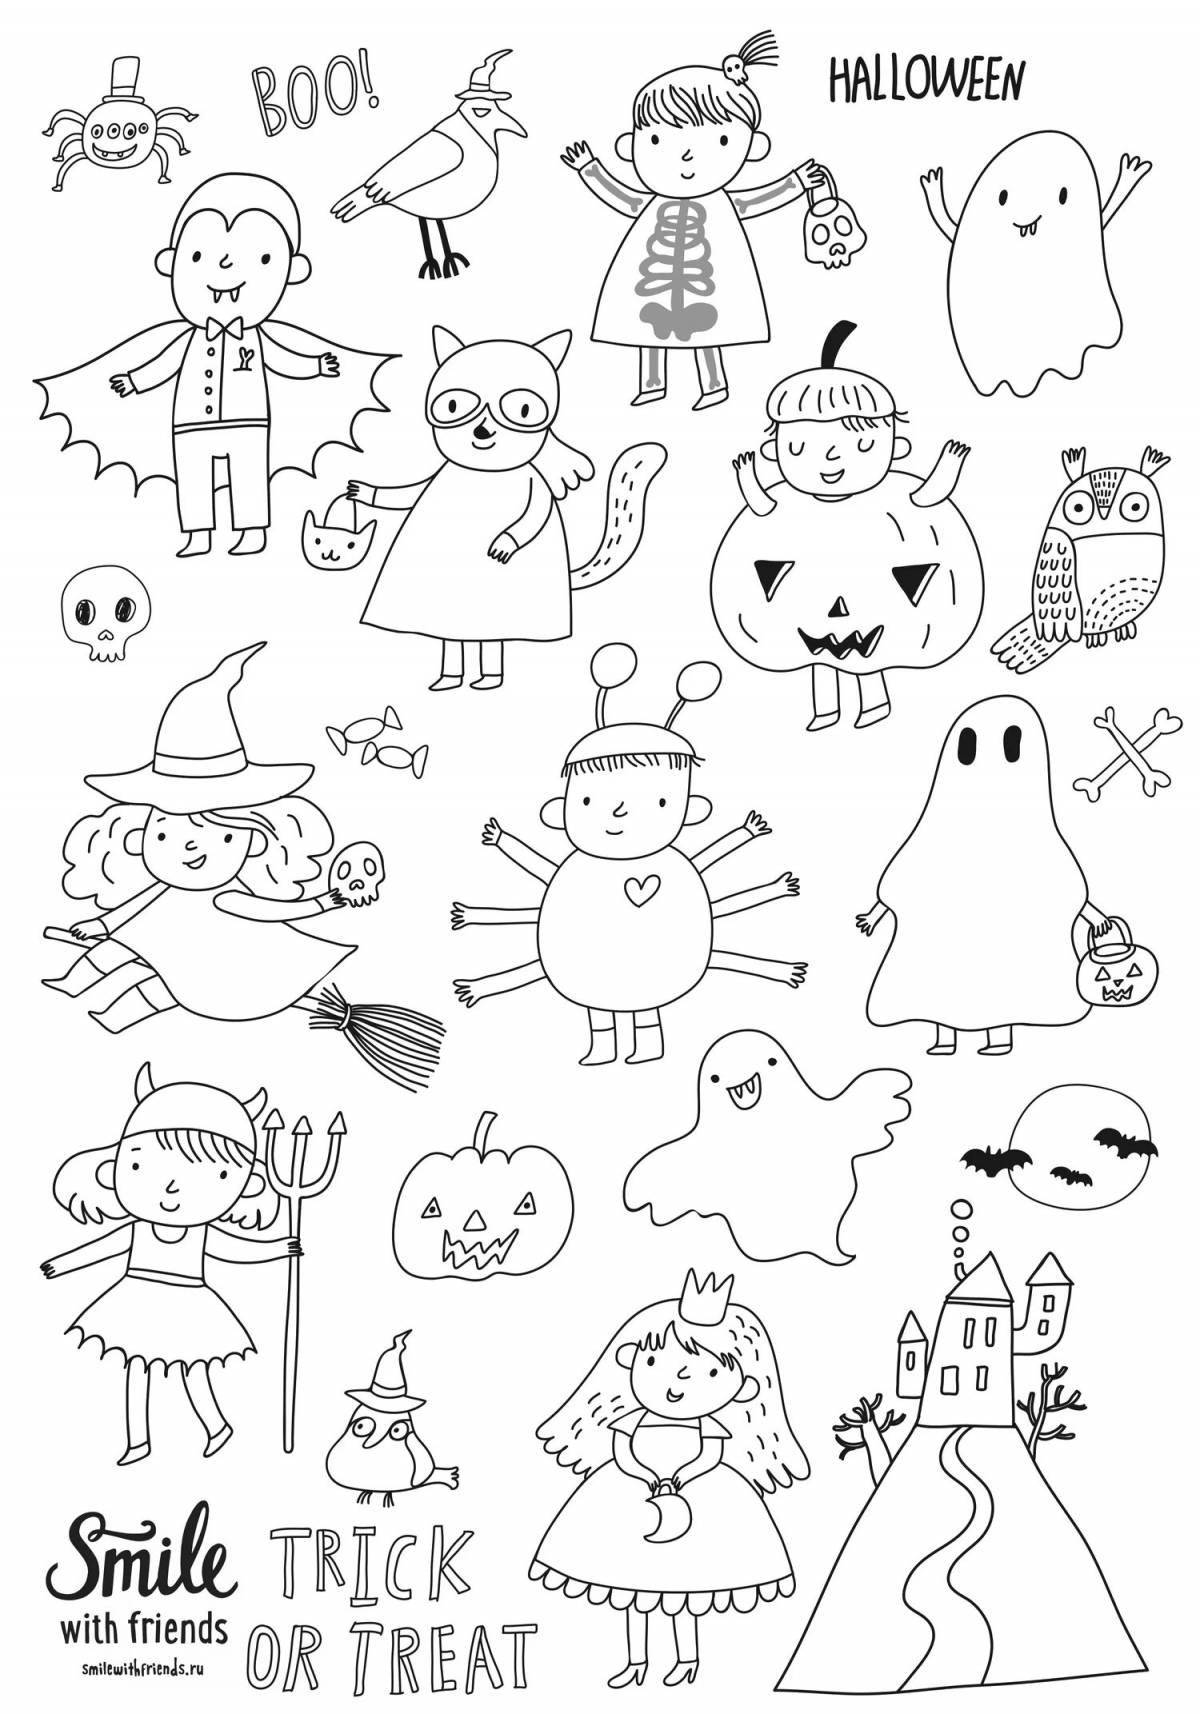 Quirky coloring small drawings for stickers